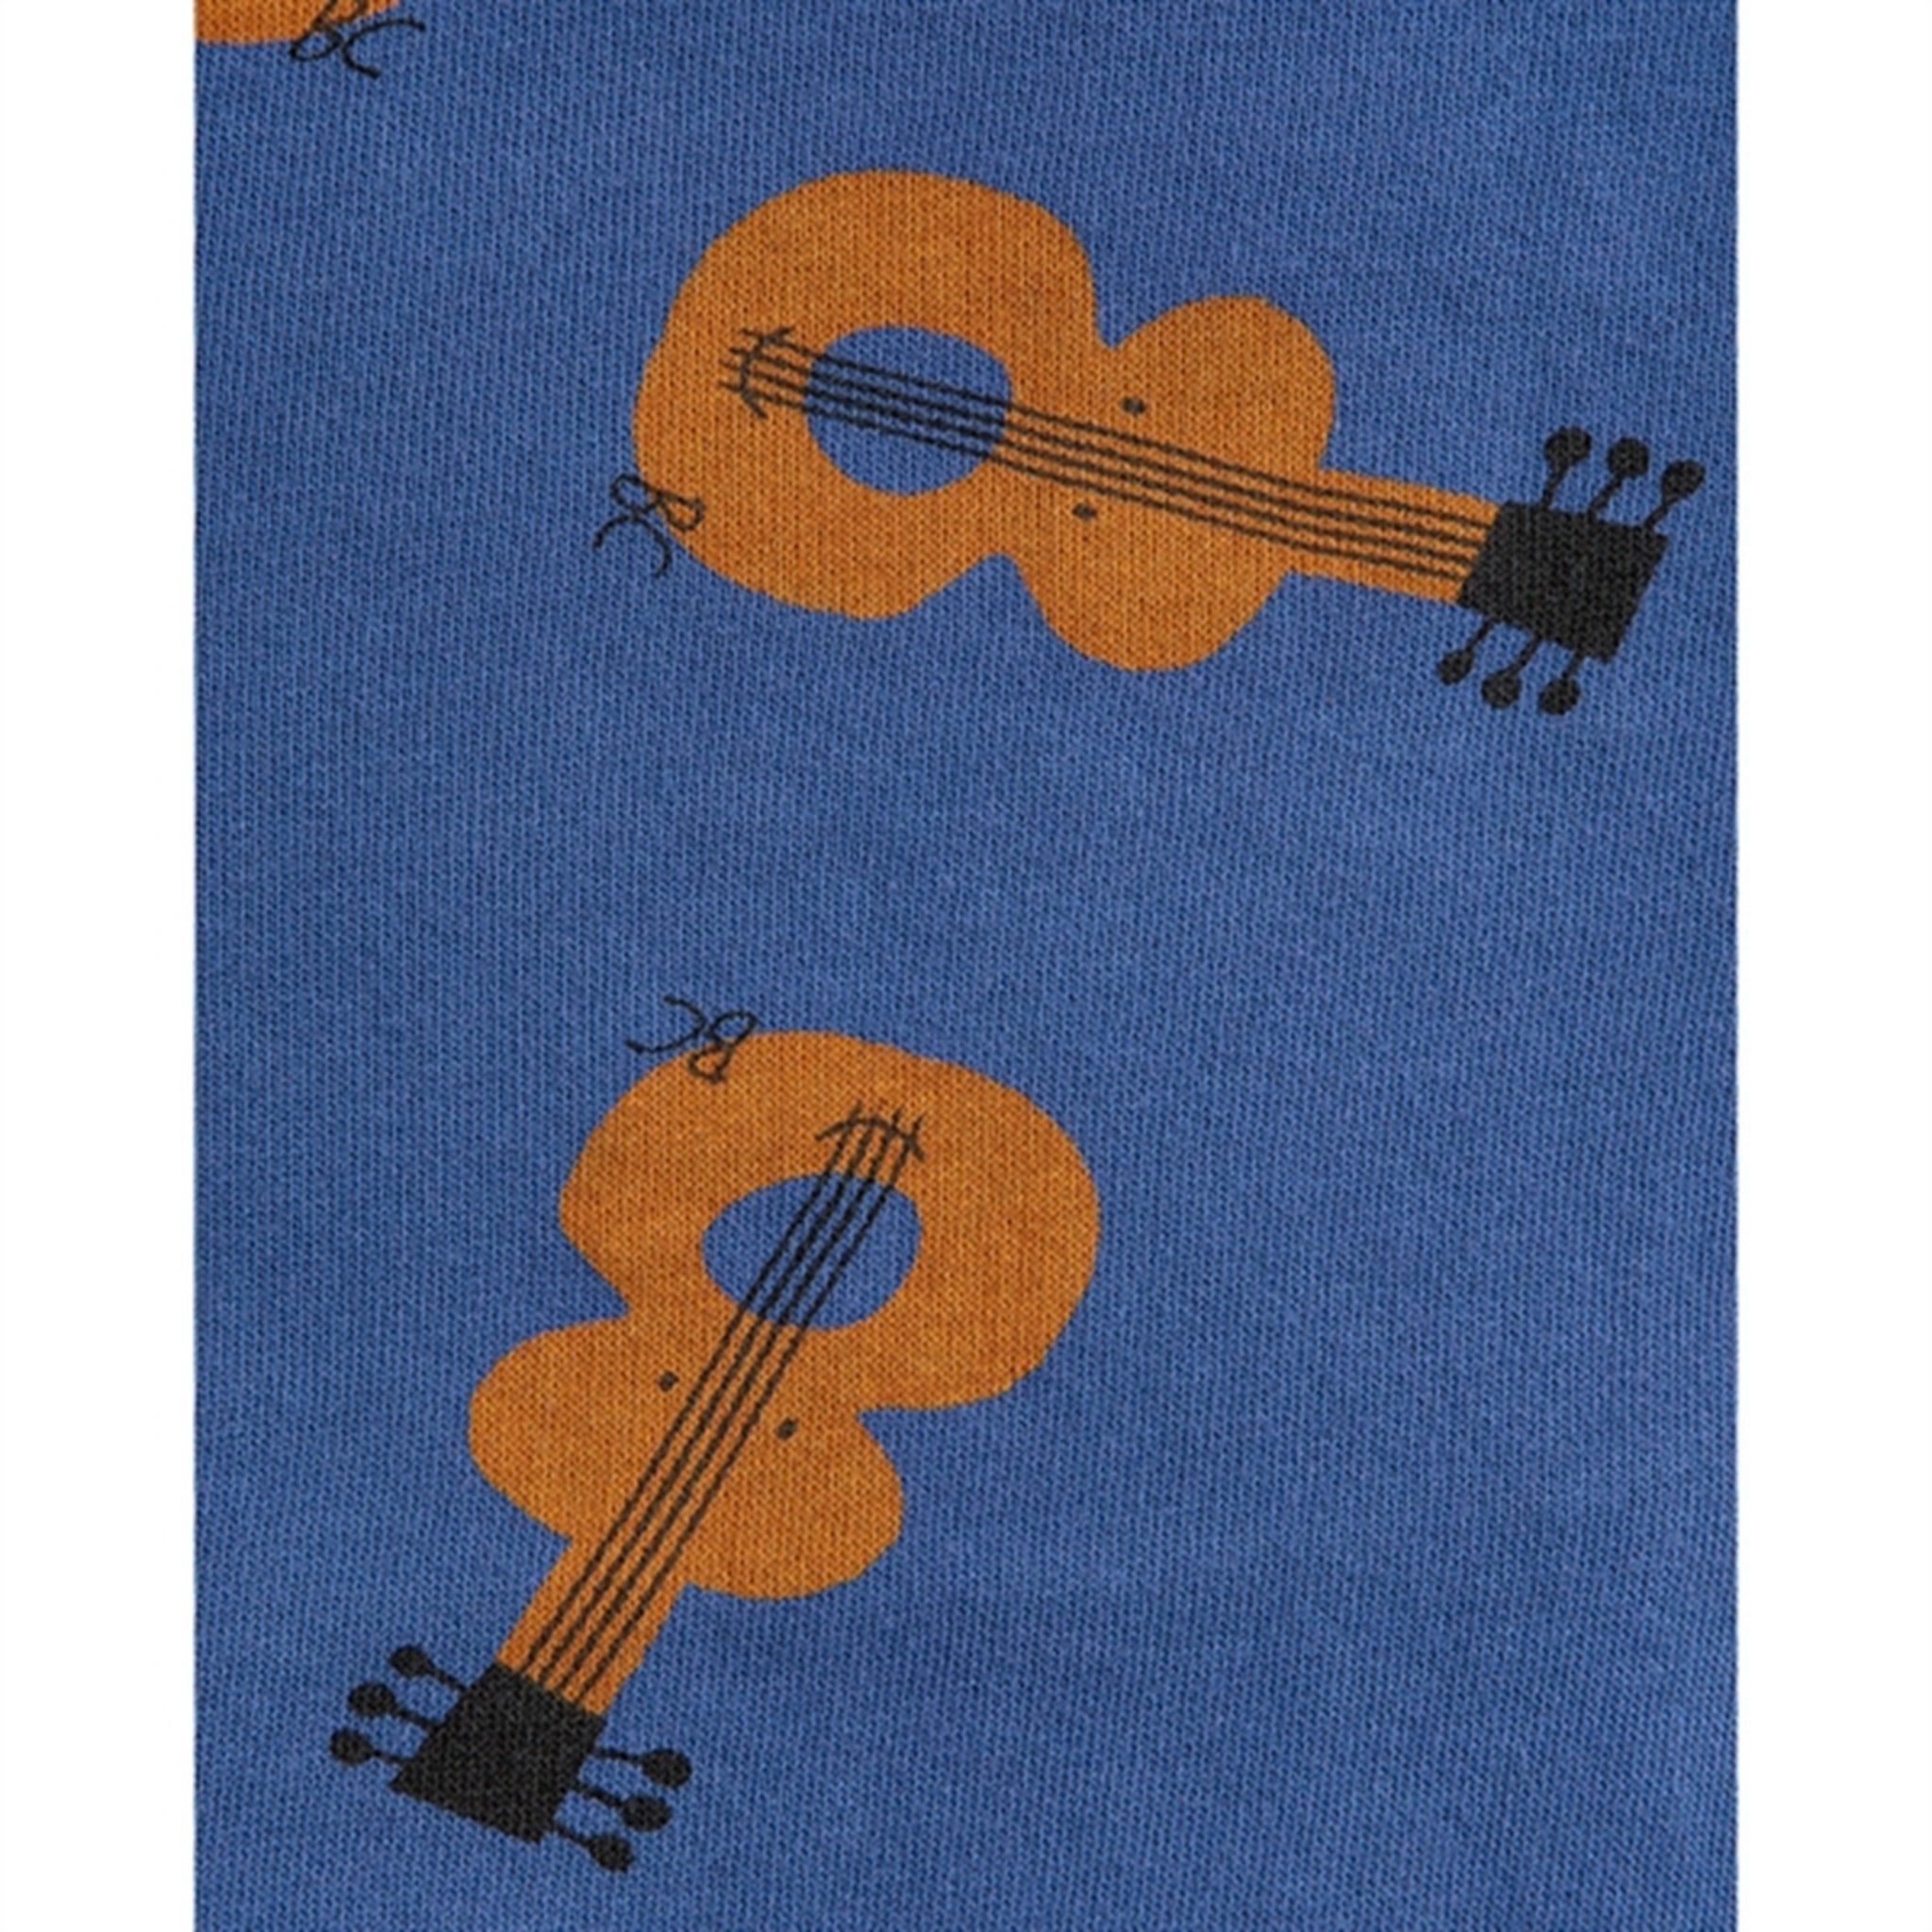 Bobo Choses Acoustic Guitar All Over Zipped Hoodie Navy Blue 7